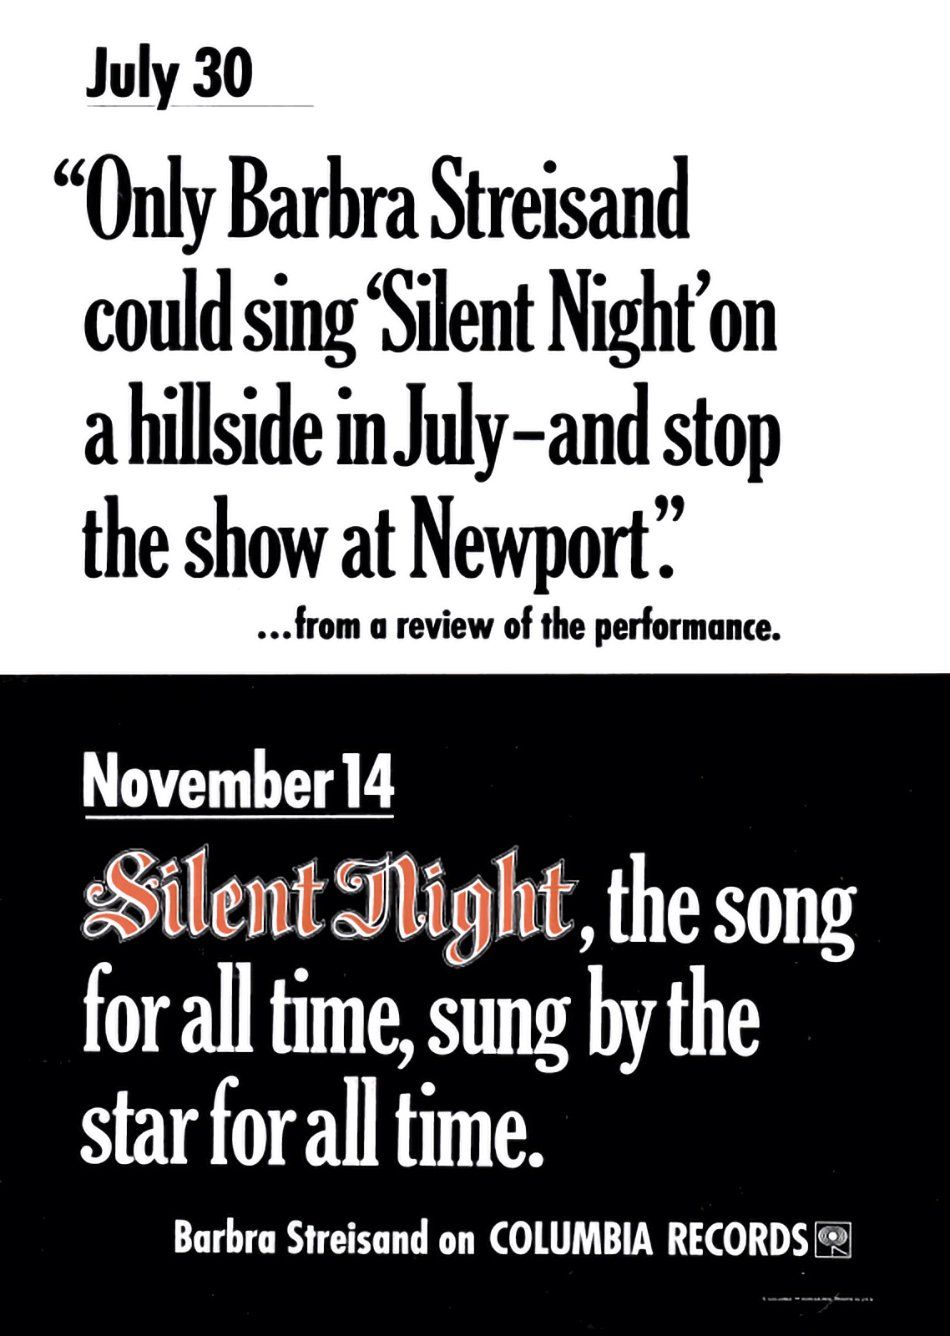 Columbia Records ad for Silent Night.